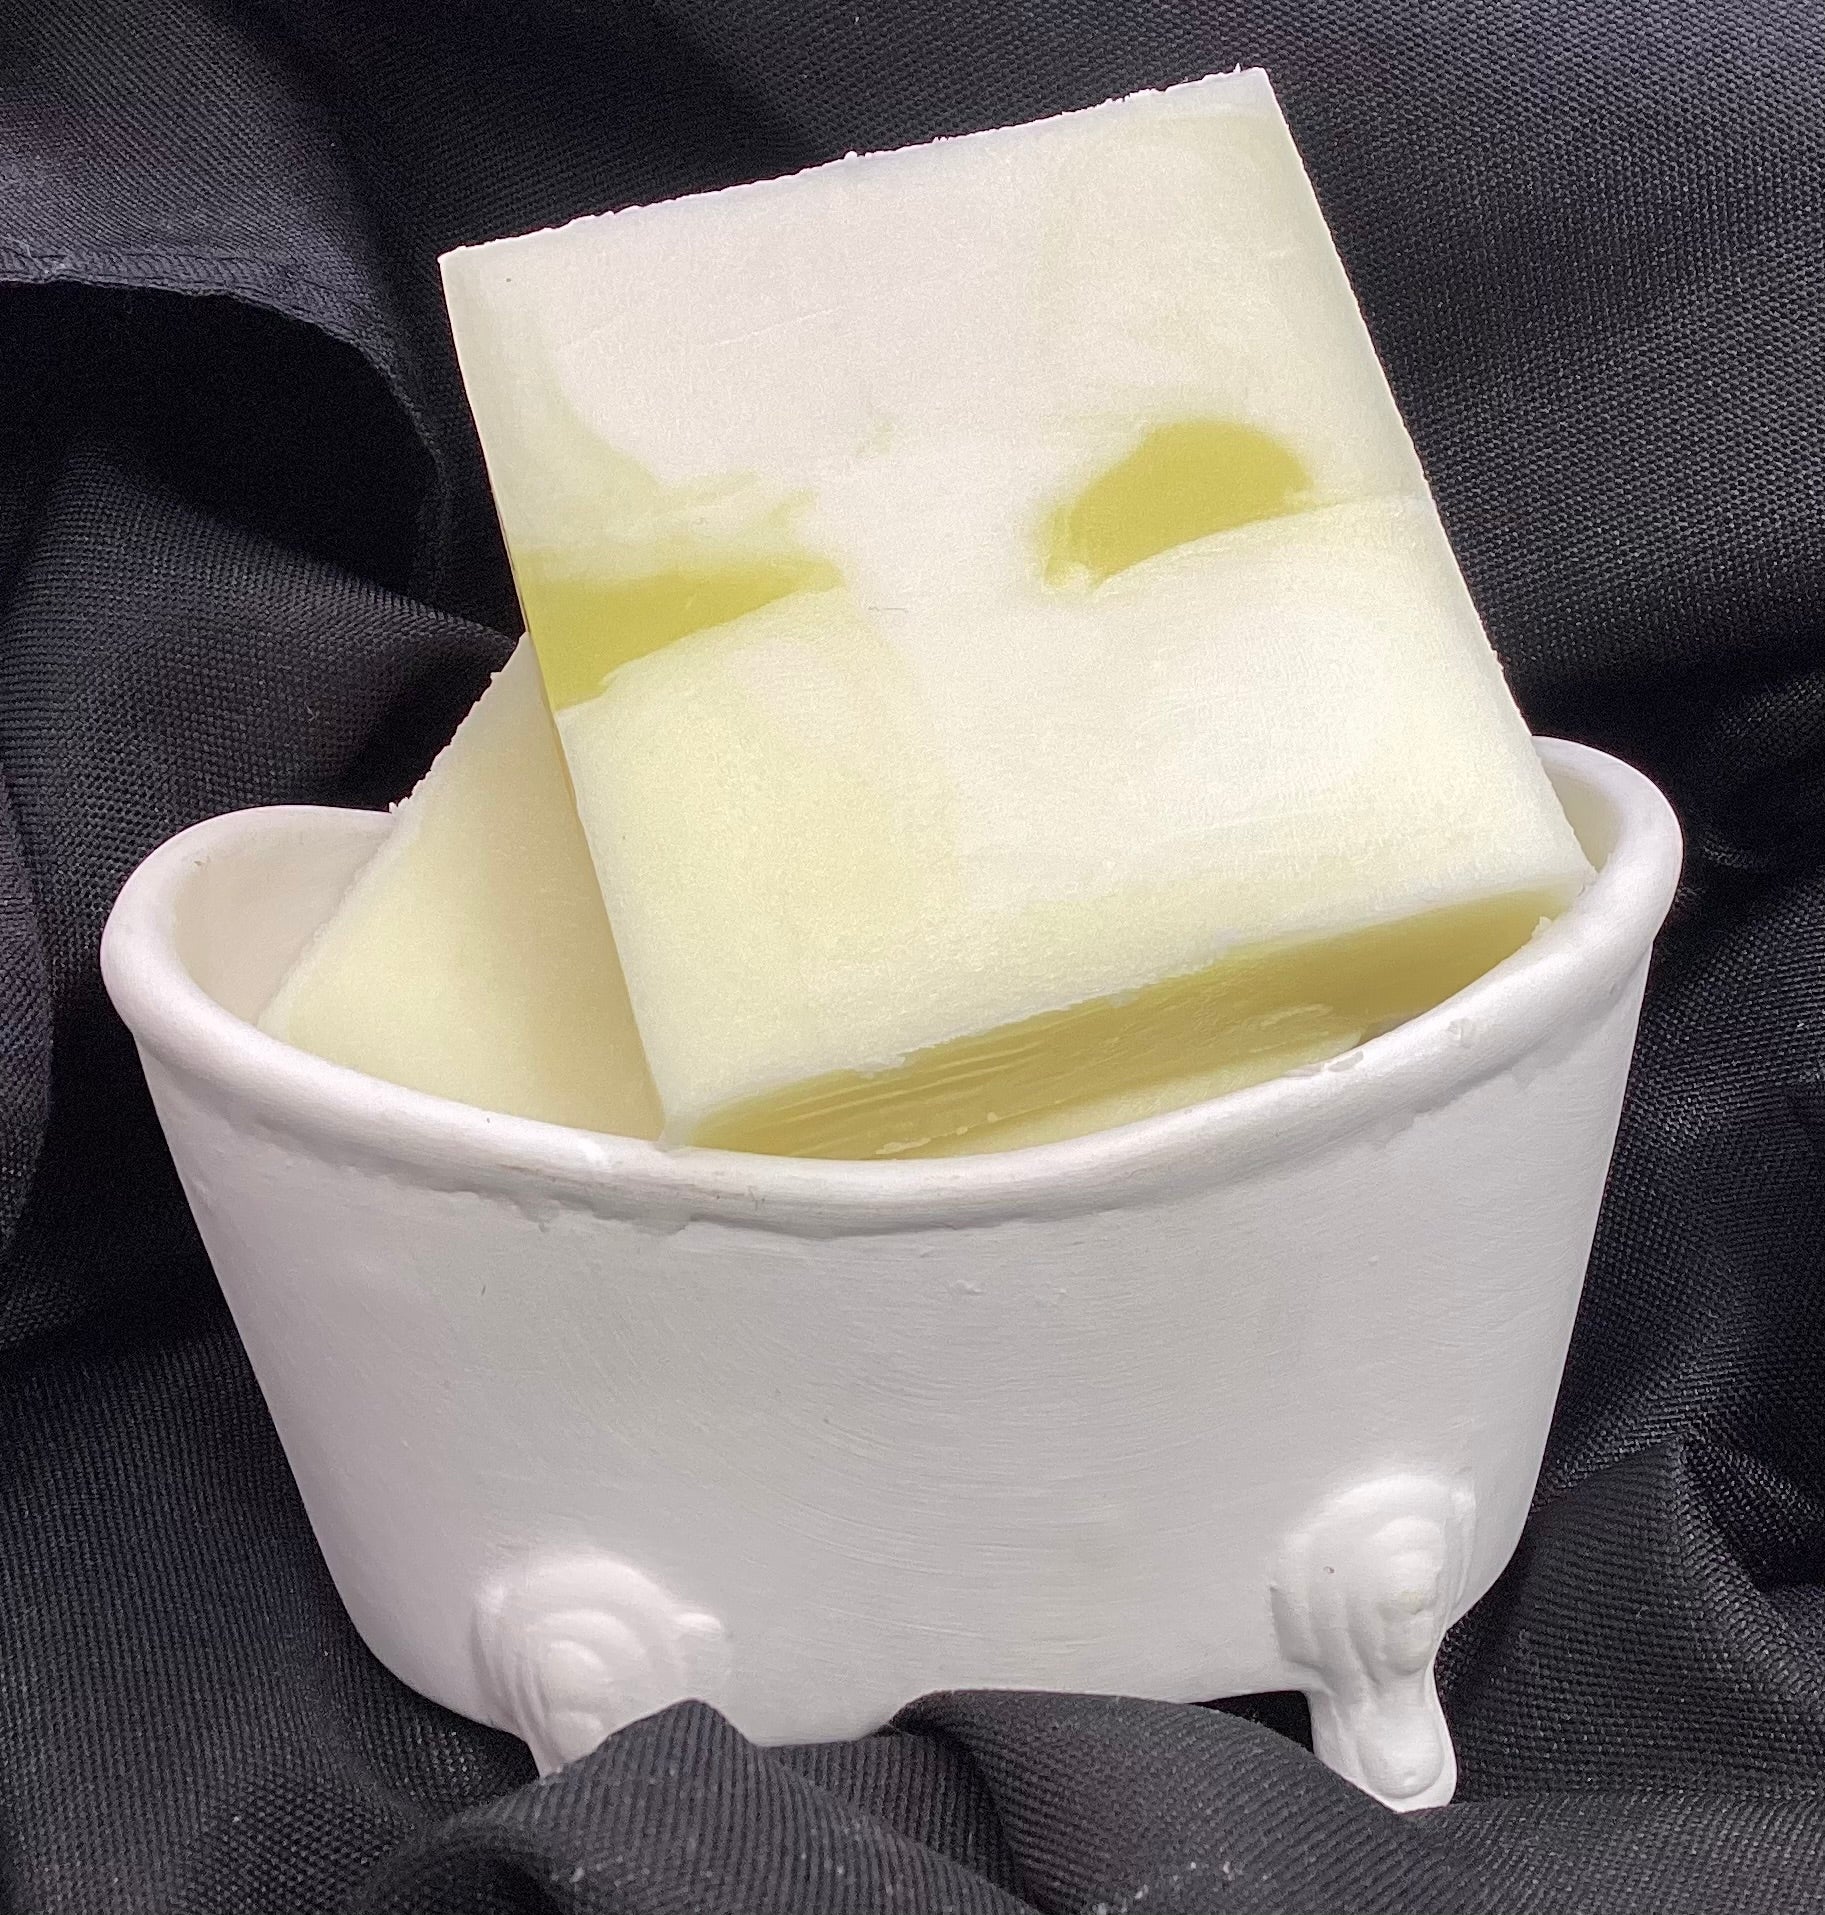 This is a 4 oz bar of Lemon Verbena scented Goats Milk Soap with honey.  

These would make a wonderful bridal shower or wedding favor!

Each item is individually made and may appear different from the photo.